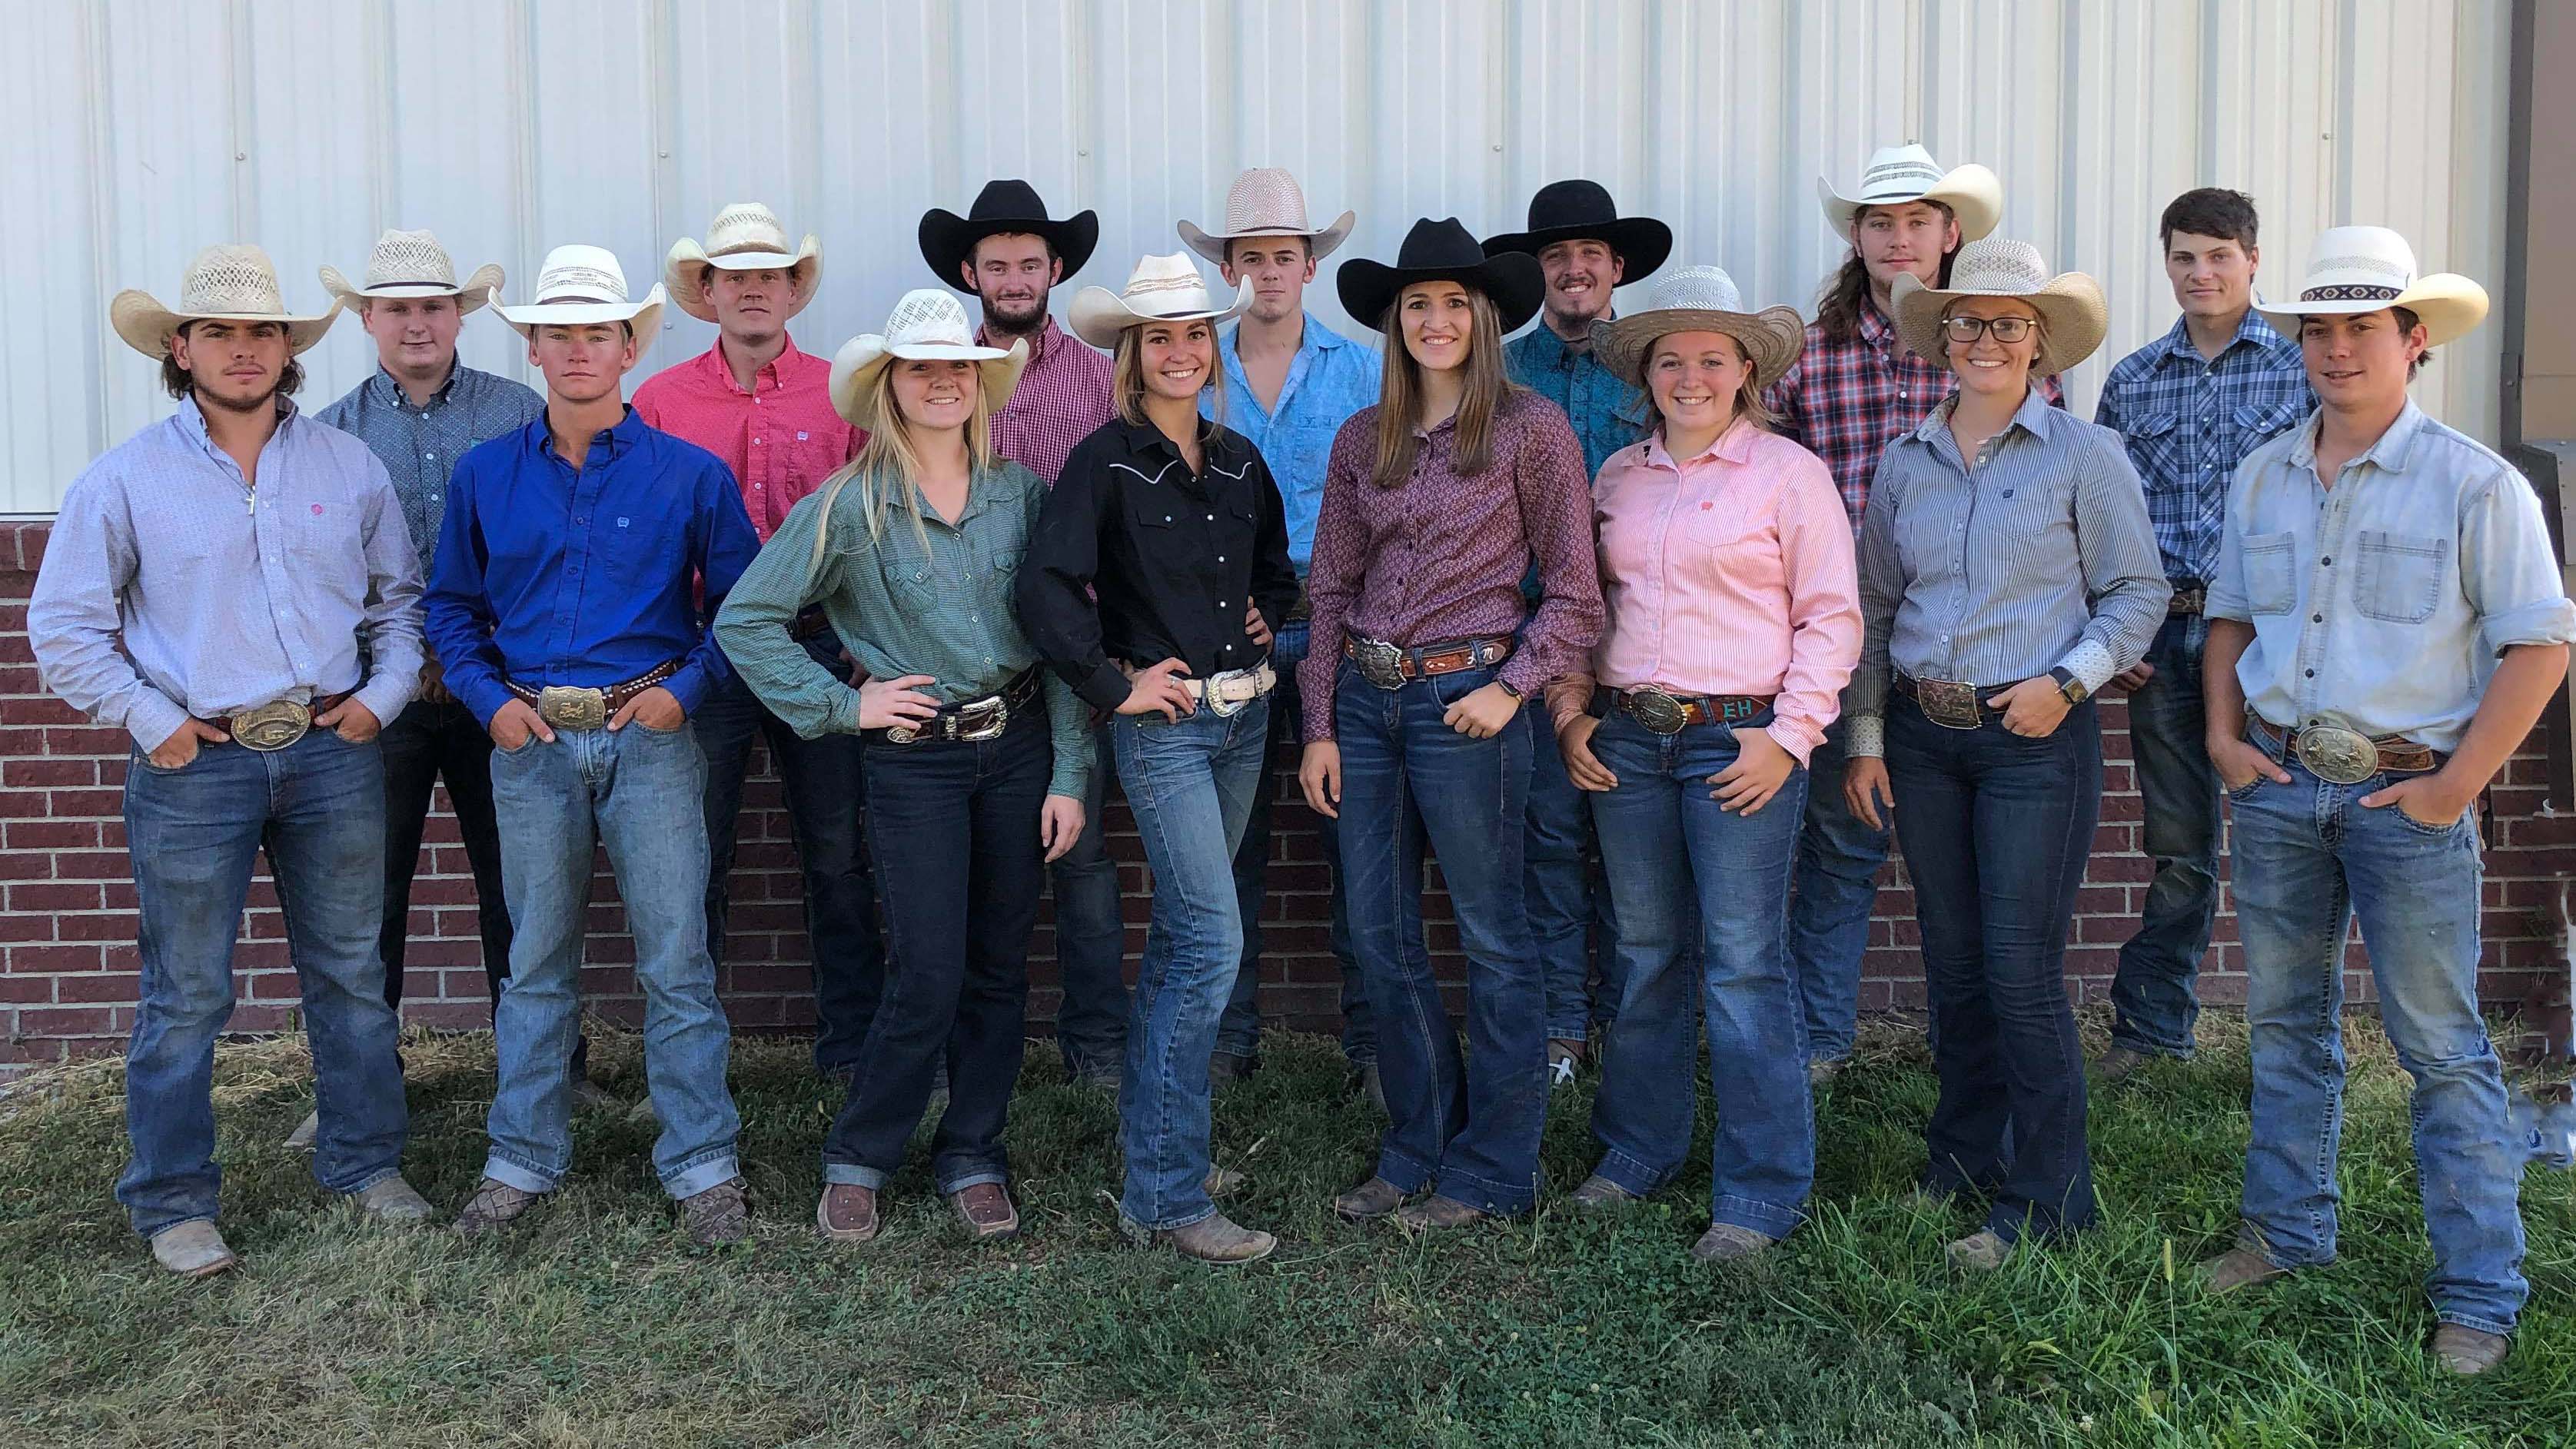 NCTA Rodeo Club members gathered on campus in October 2020 for a club photo. Nathan Burnett, champion saddle bronc rider, is in center back row. (NCTA News photo)